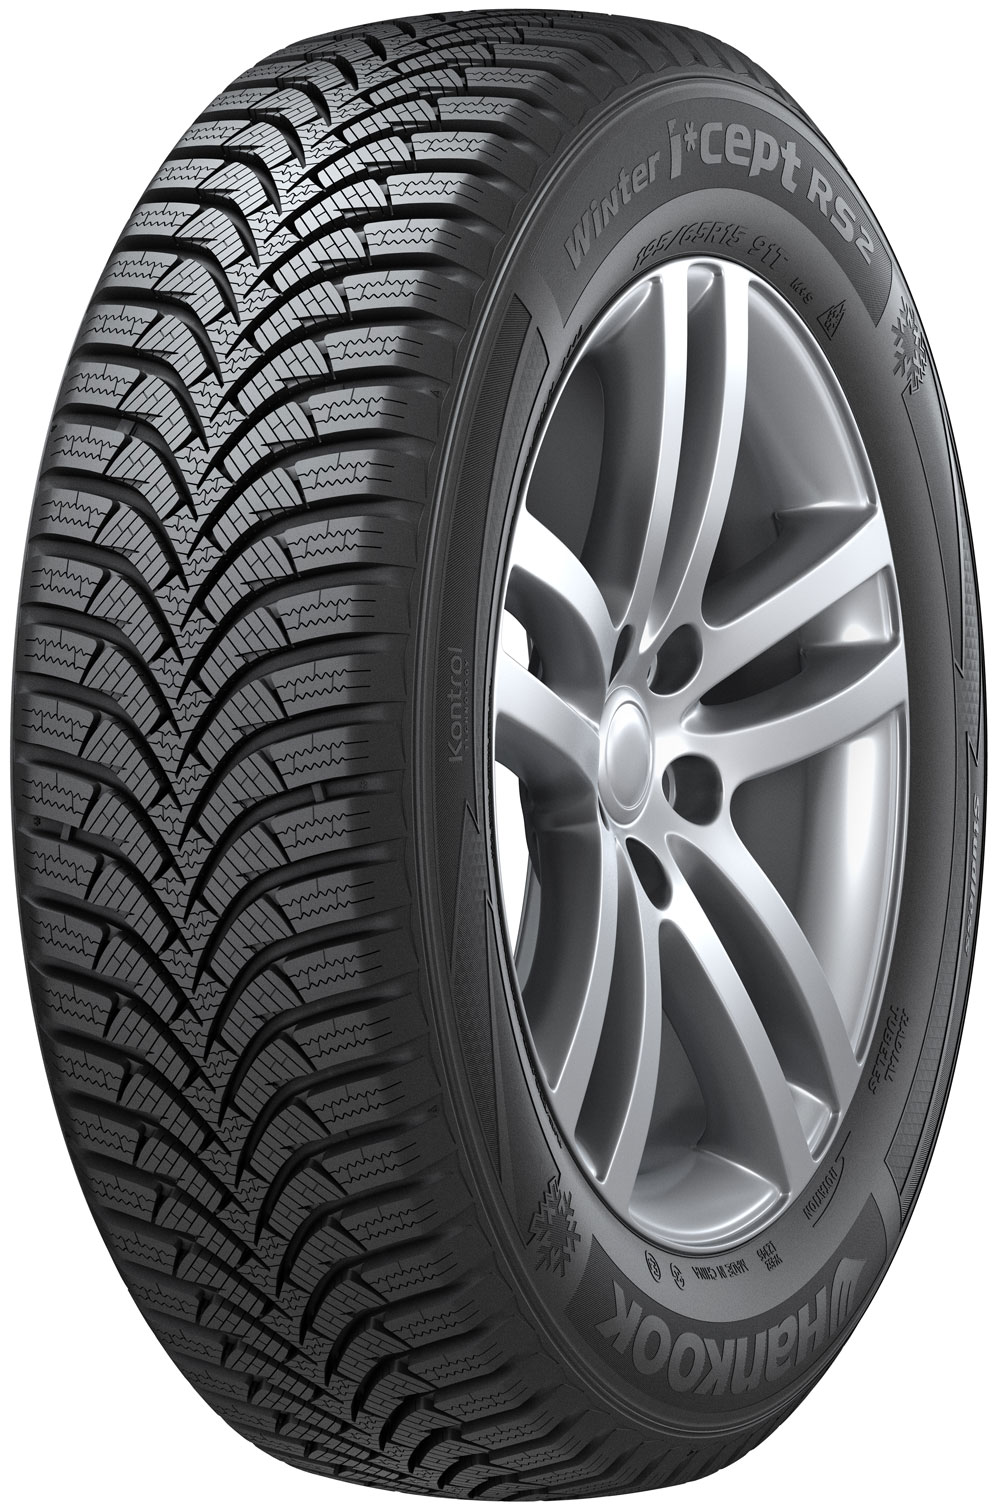 Anvelope auto HANKOOK Winter icept RS 2 (W452) BMW 195/50 R15 82T